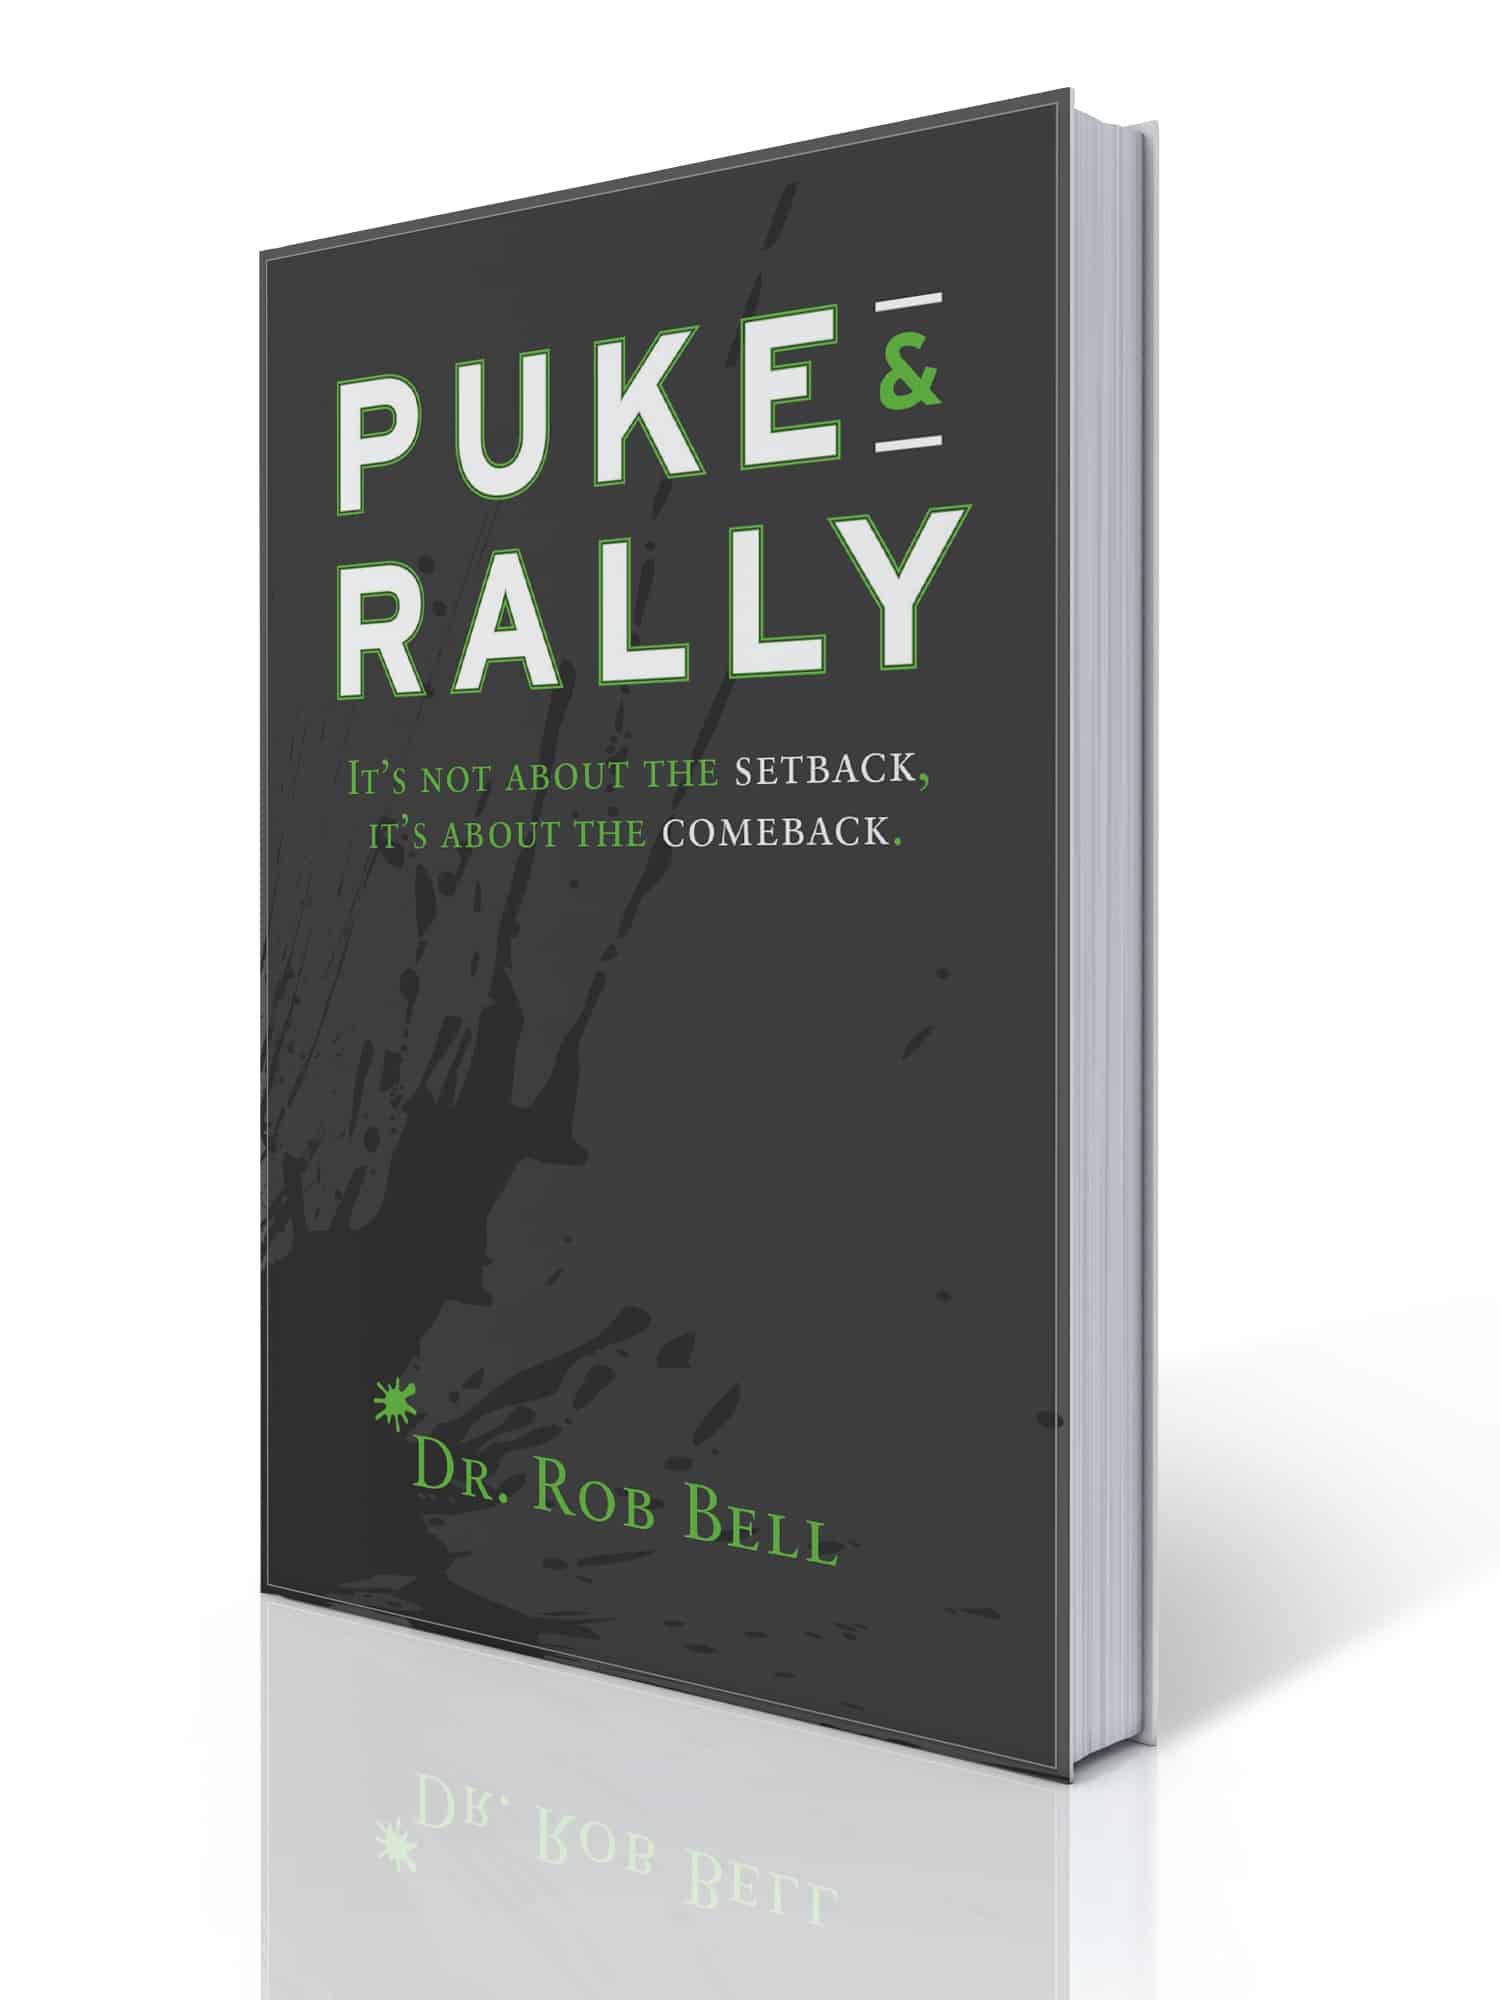 PUKE & RALLY: It's anout about the setback, it's about the comeback